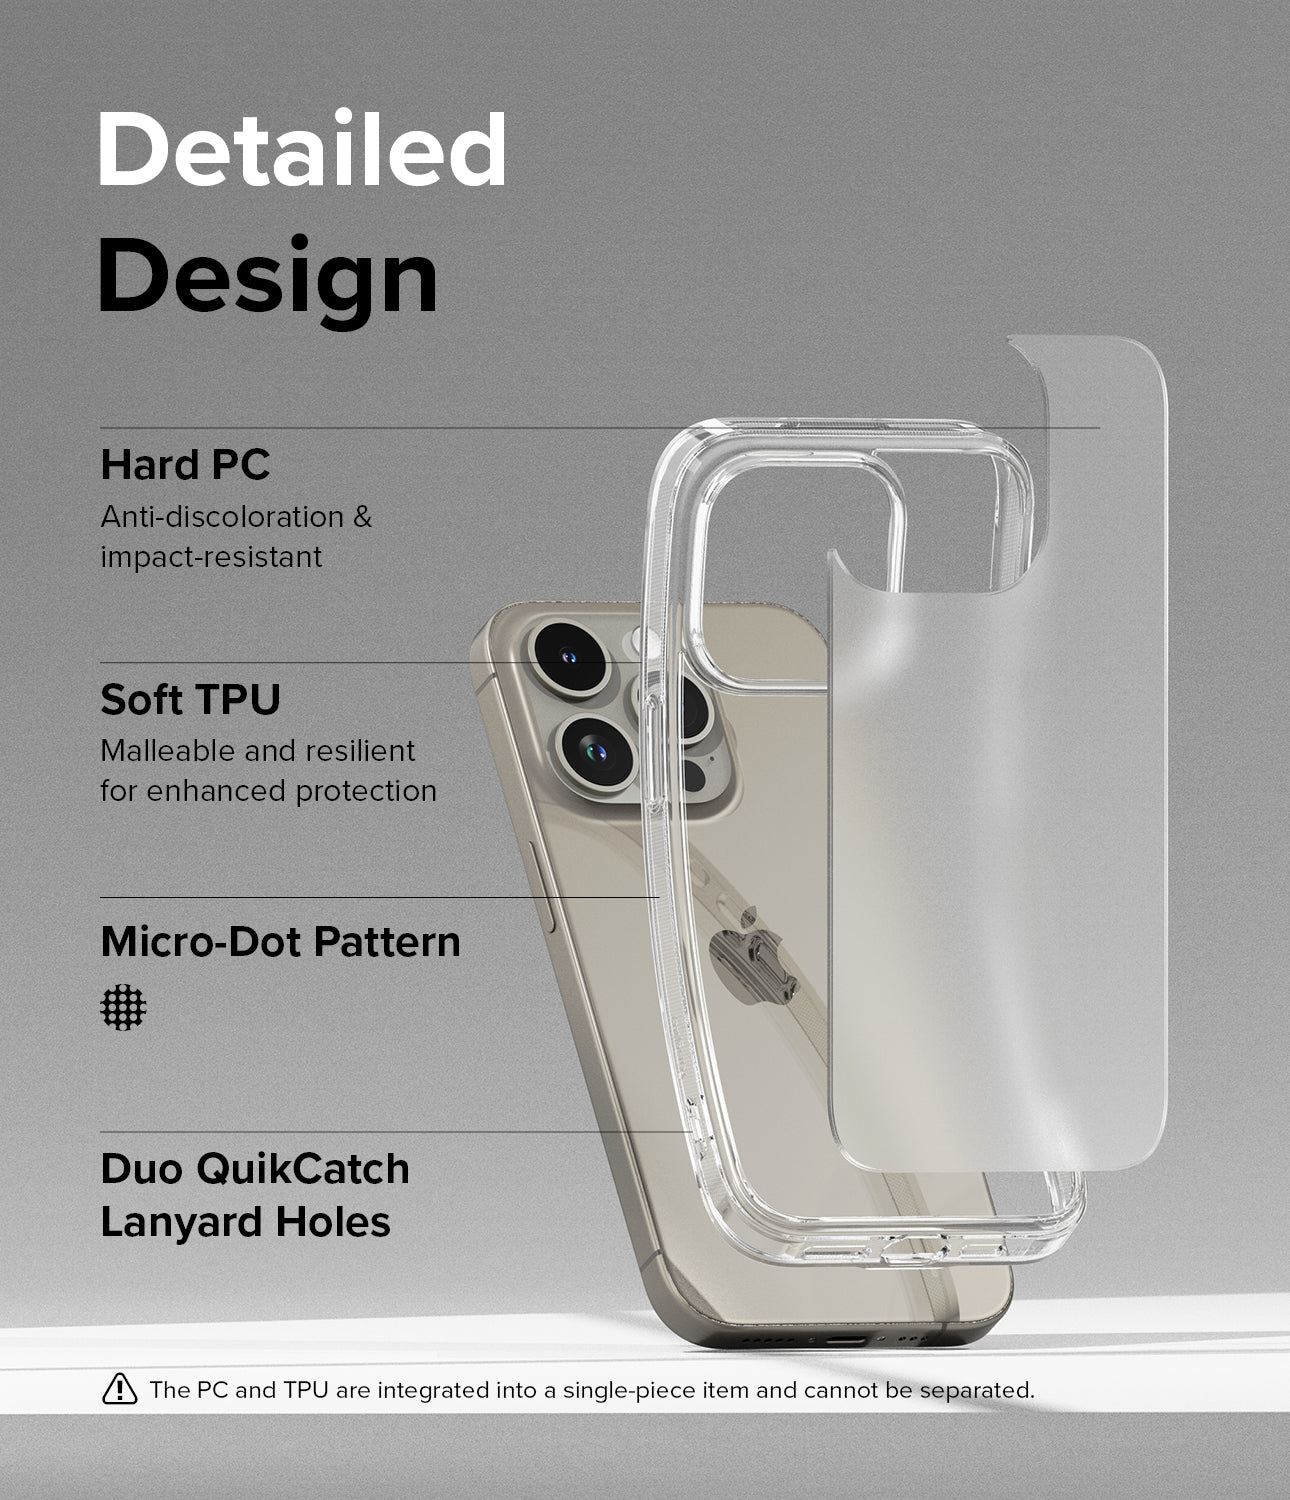 iPhone 15 Pro Max Case | Fusion Matte Clear - Detailed Design. Anti-discoloration and impact-resistant with Hard PC. Malleable and resilient for enhanced protection with Soft TPU. Micro-Dot Pattern. Duo QuikCatch Lanyard Holes